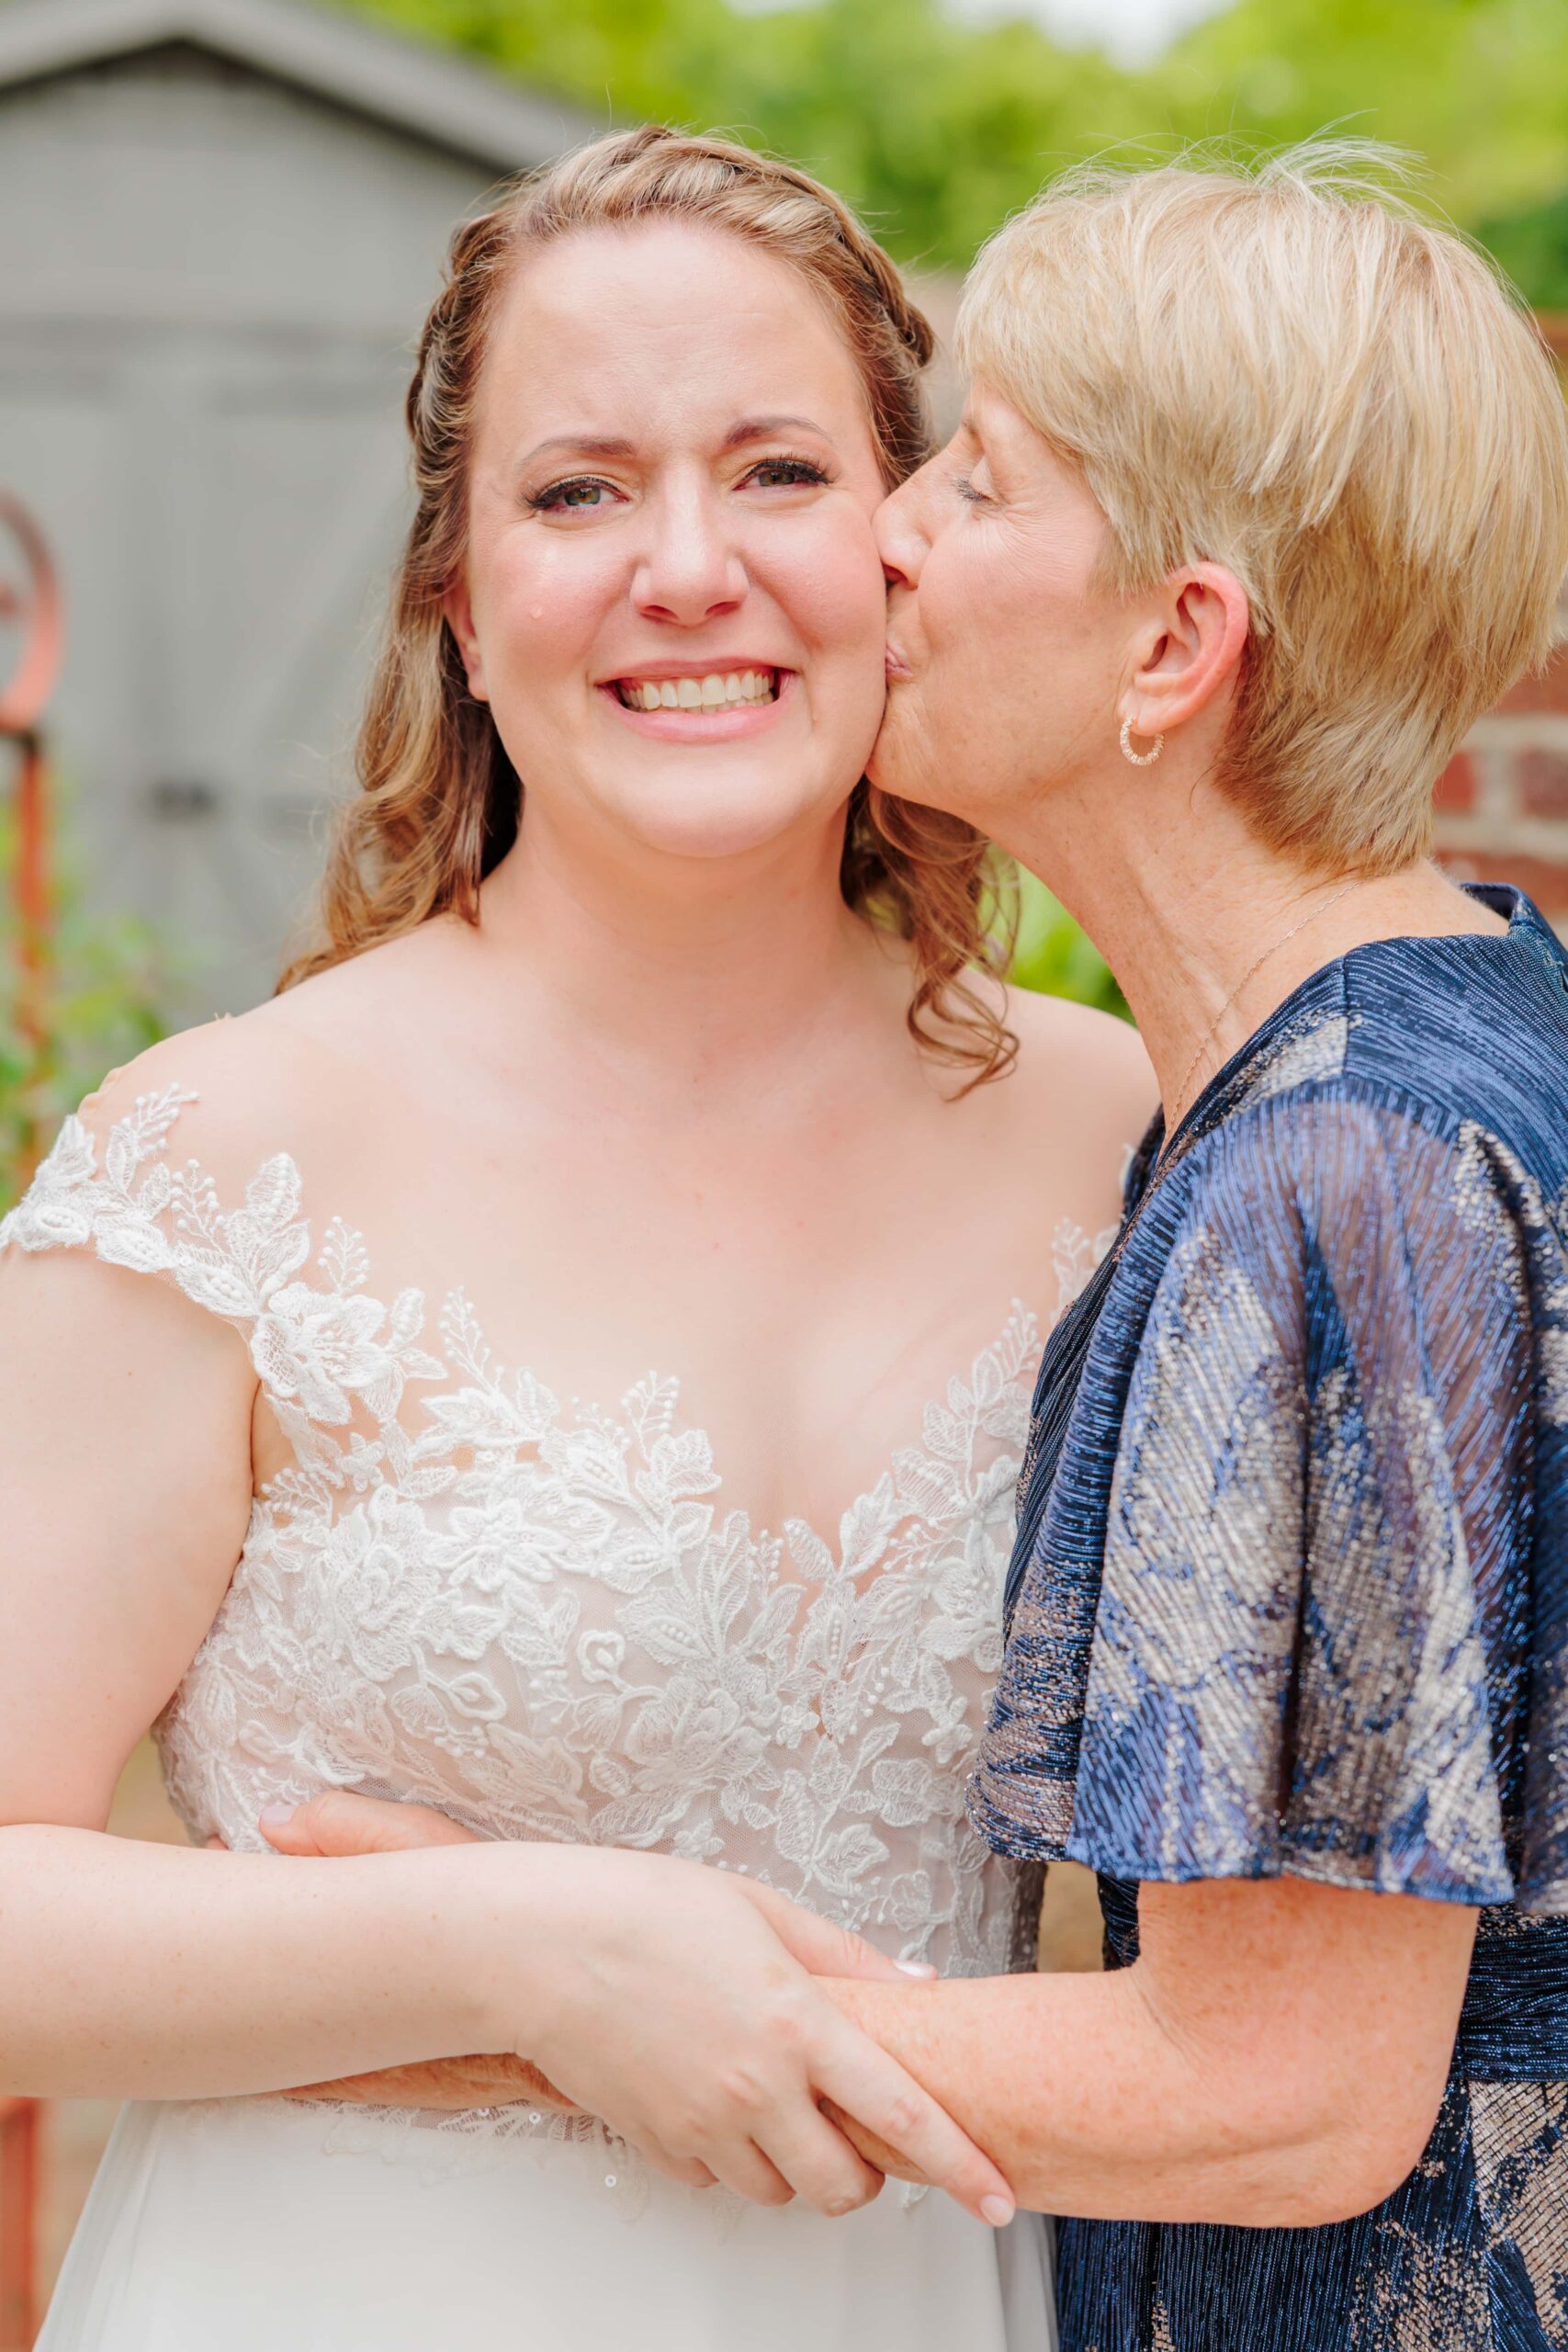 The bride smiles to the camera with tears in her eyes as her mother kisses her cheek before her wedding day in Greensboro.